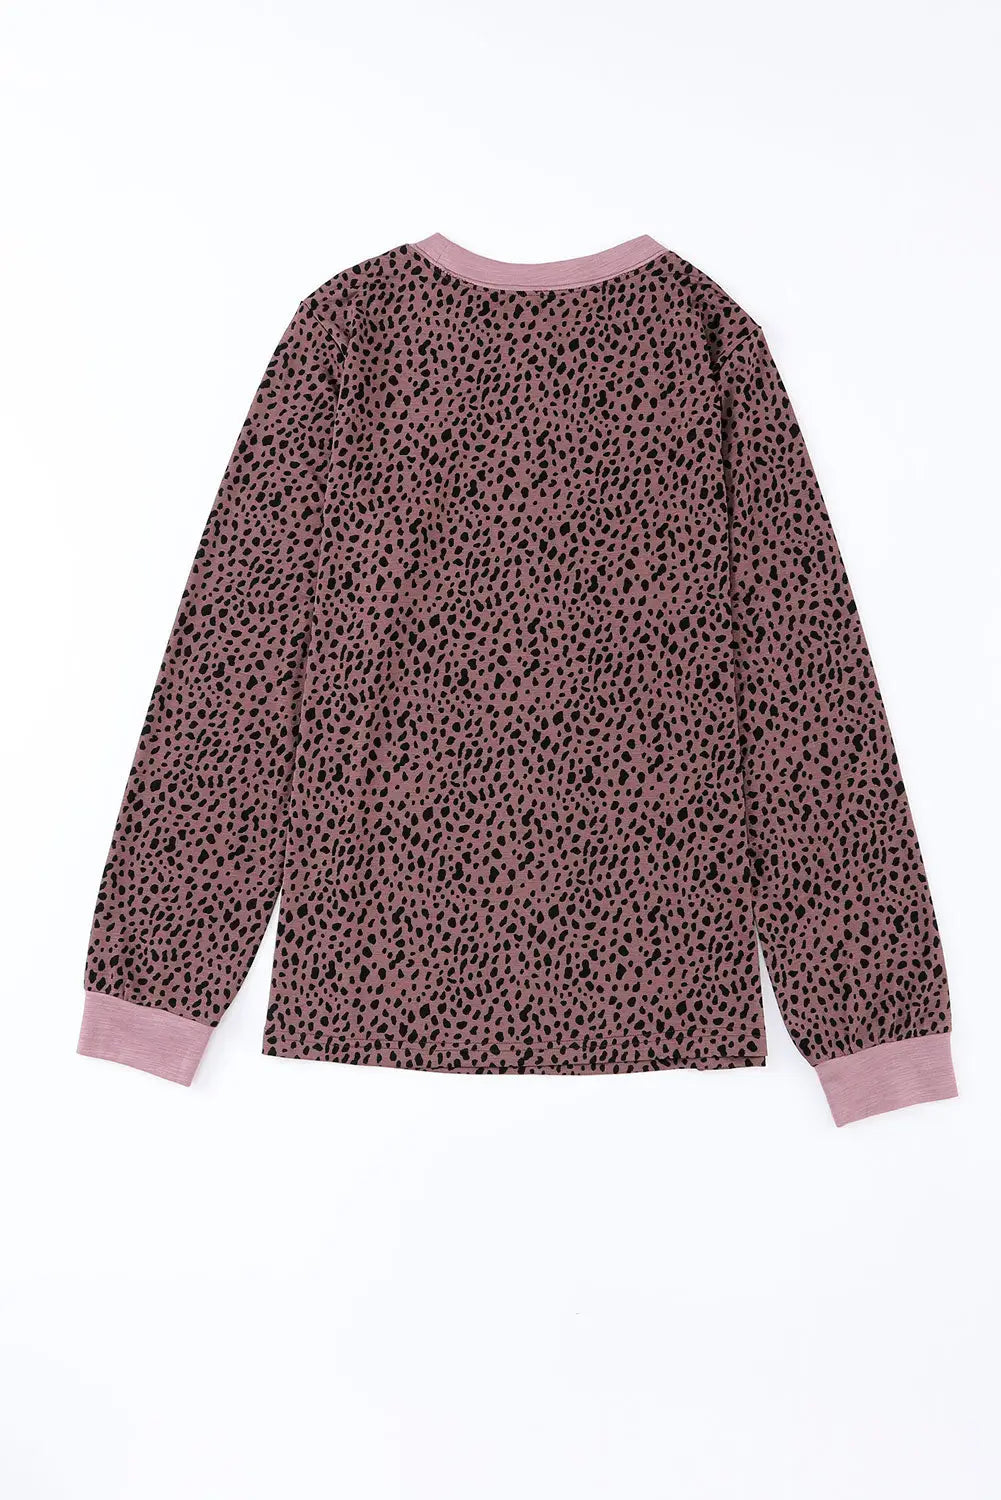 Animal Spotted Print Round Neck Long Sleeve Top-4